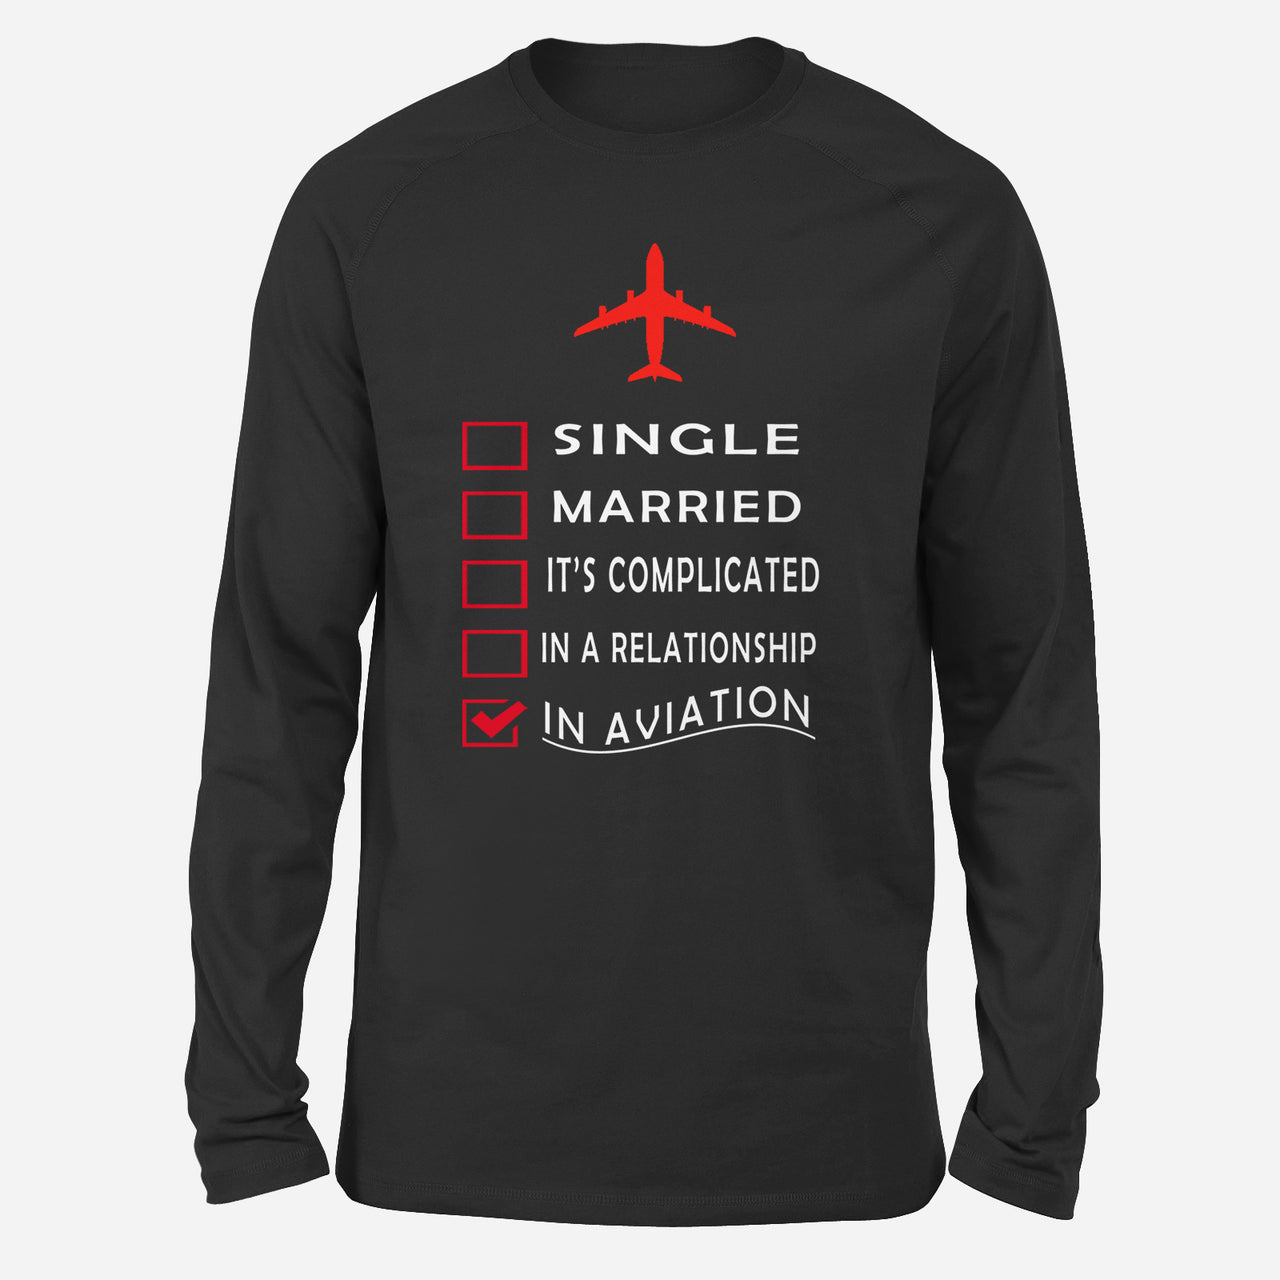 In Aviation Designed Long-Sleeve T-Shirts